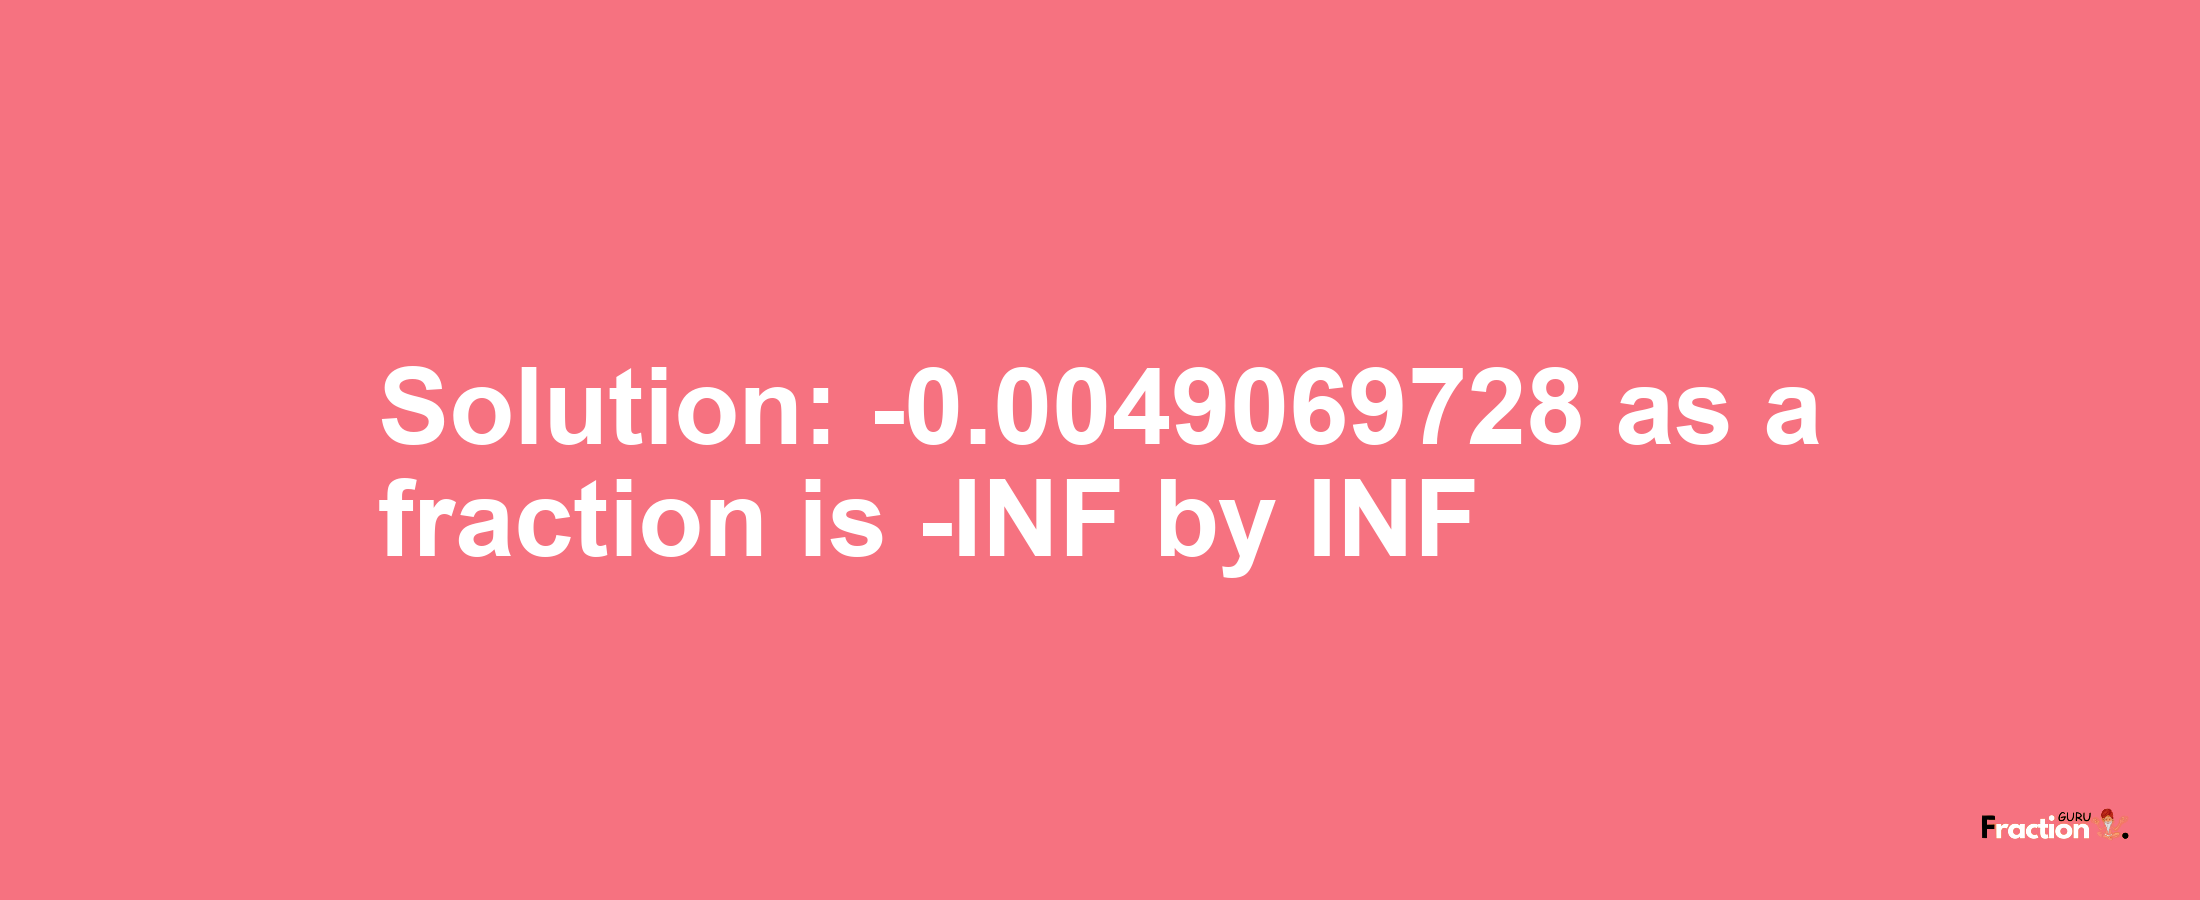 Solution:-0.0049069728 as a fraction is -INF/INF